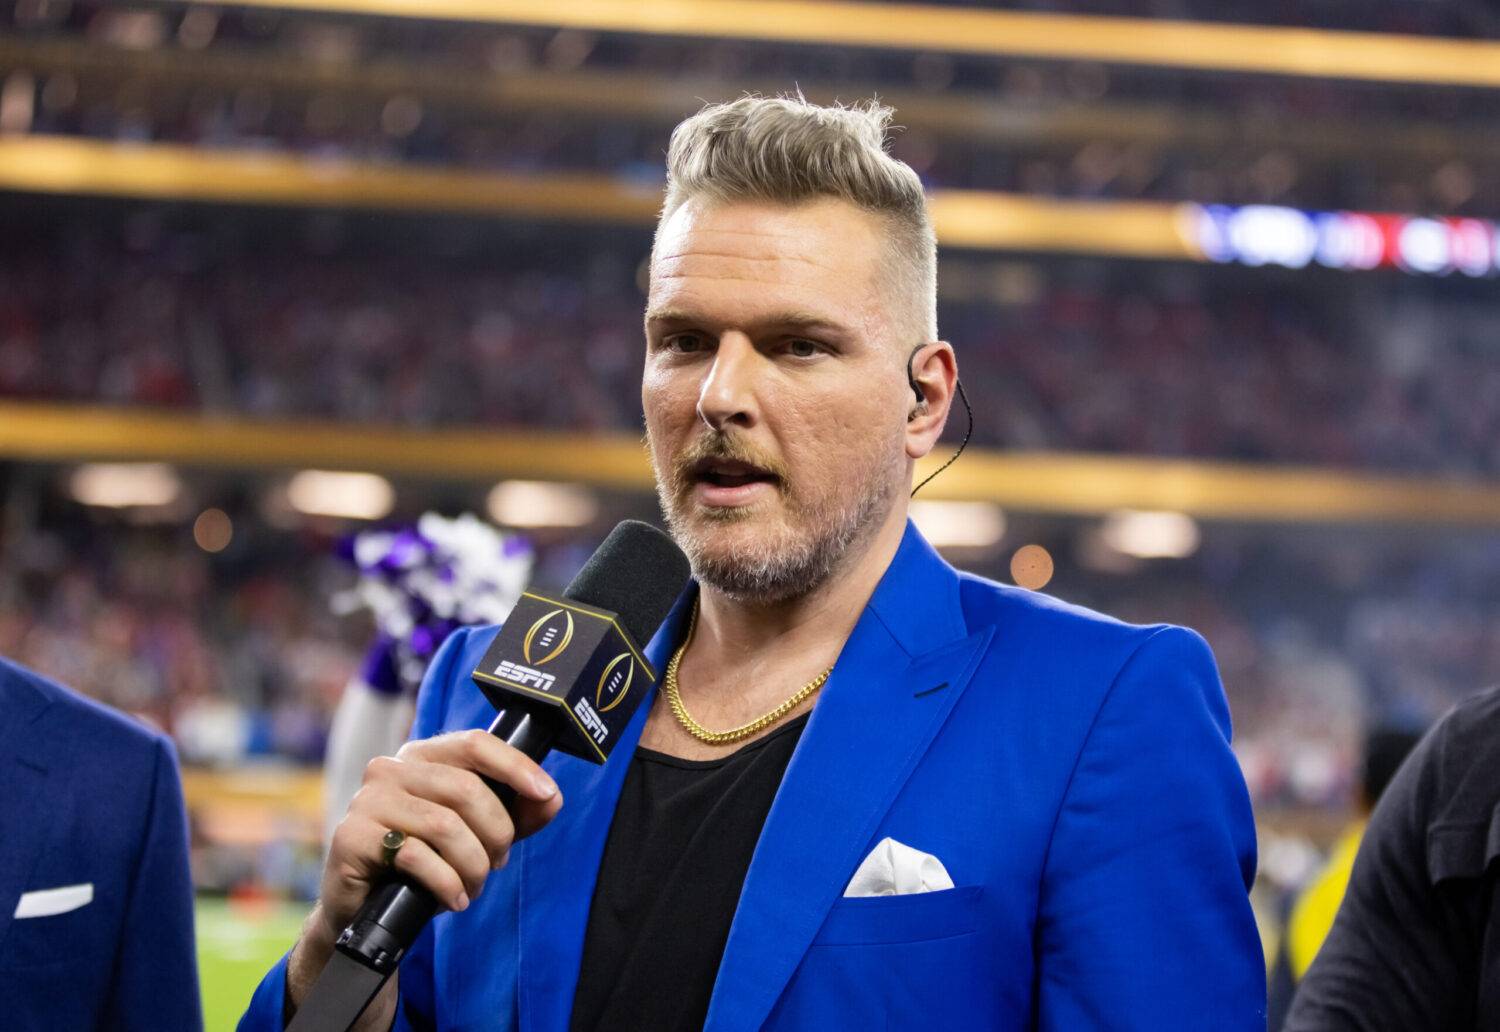 Pat McAfee Could Make Surprise Appearance At Disney Upfront